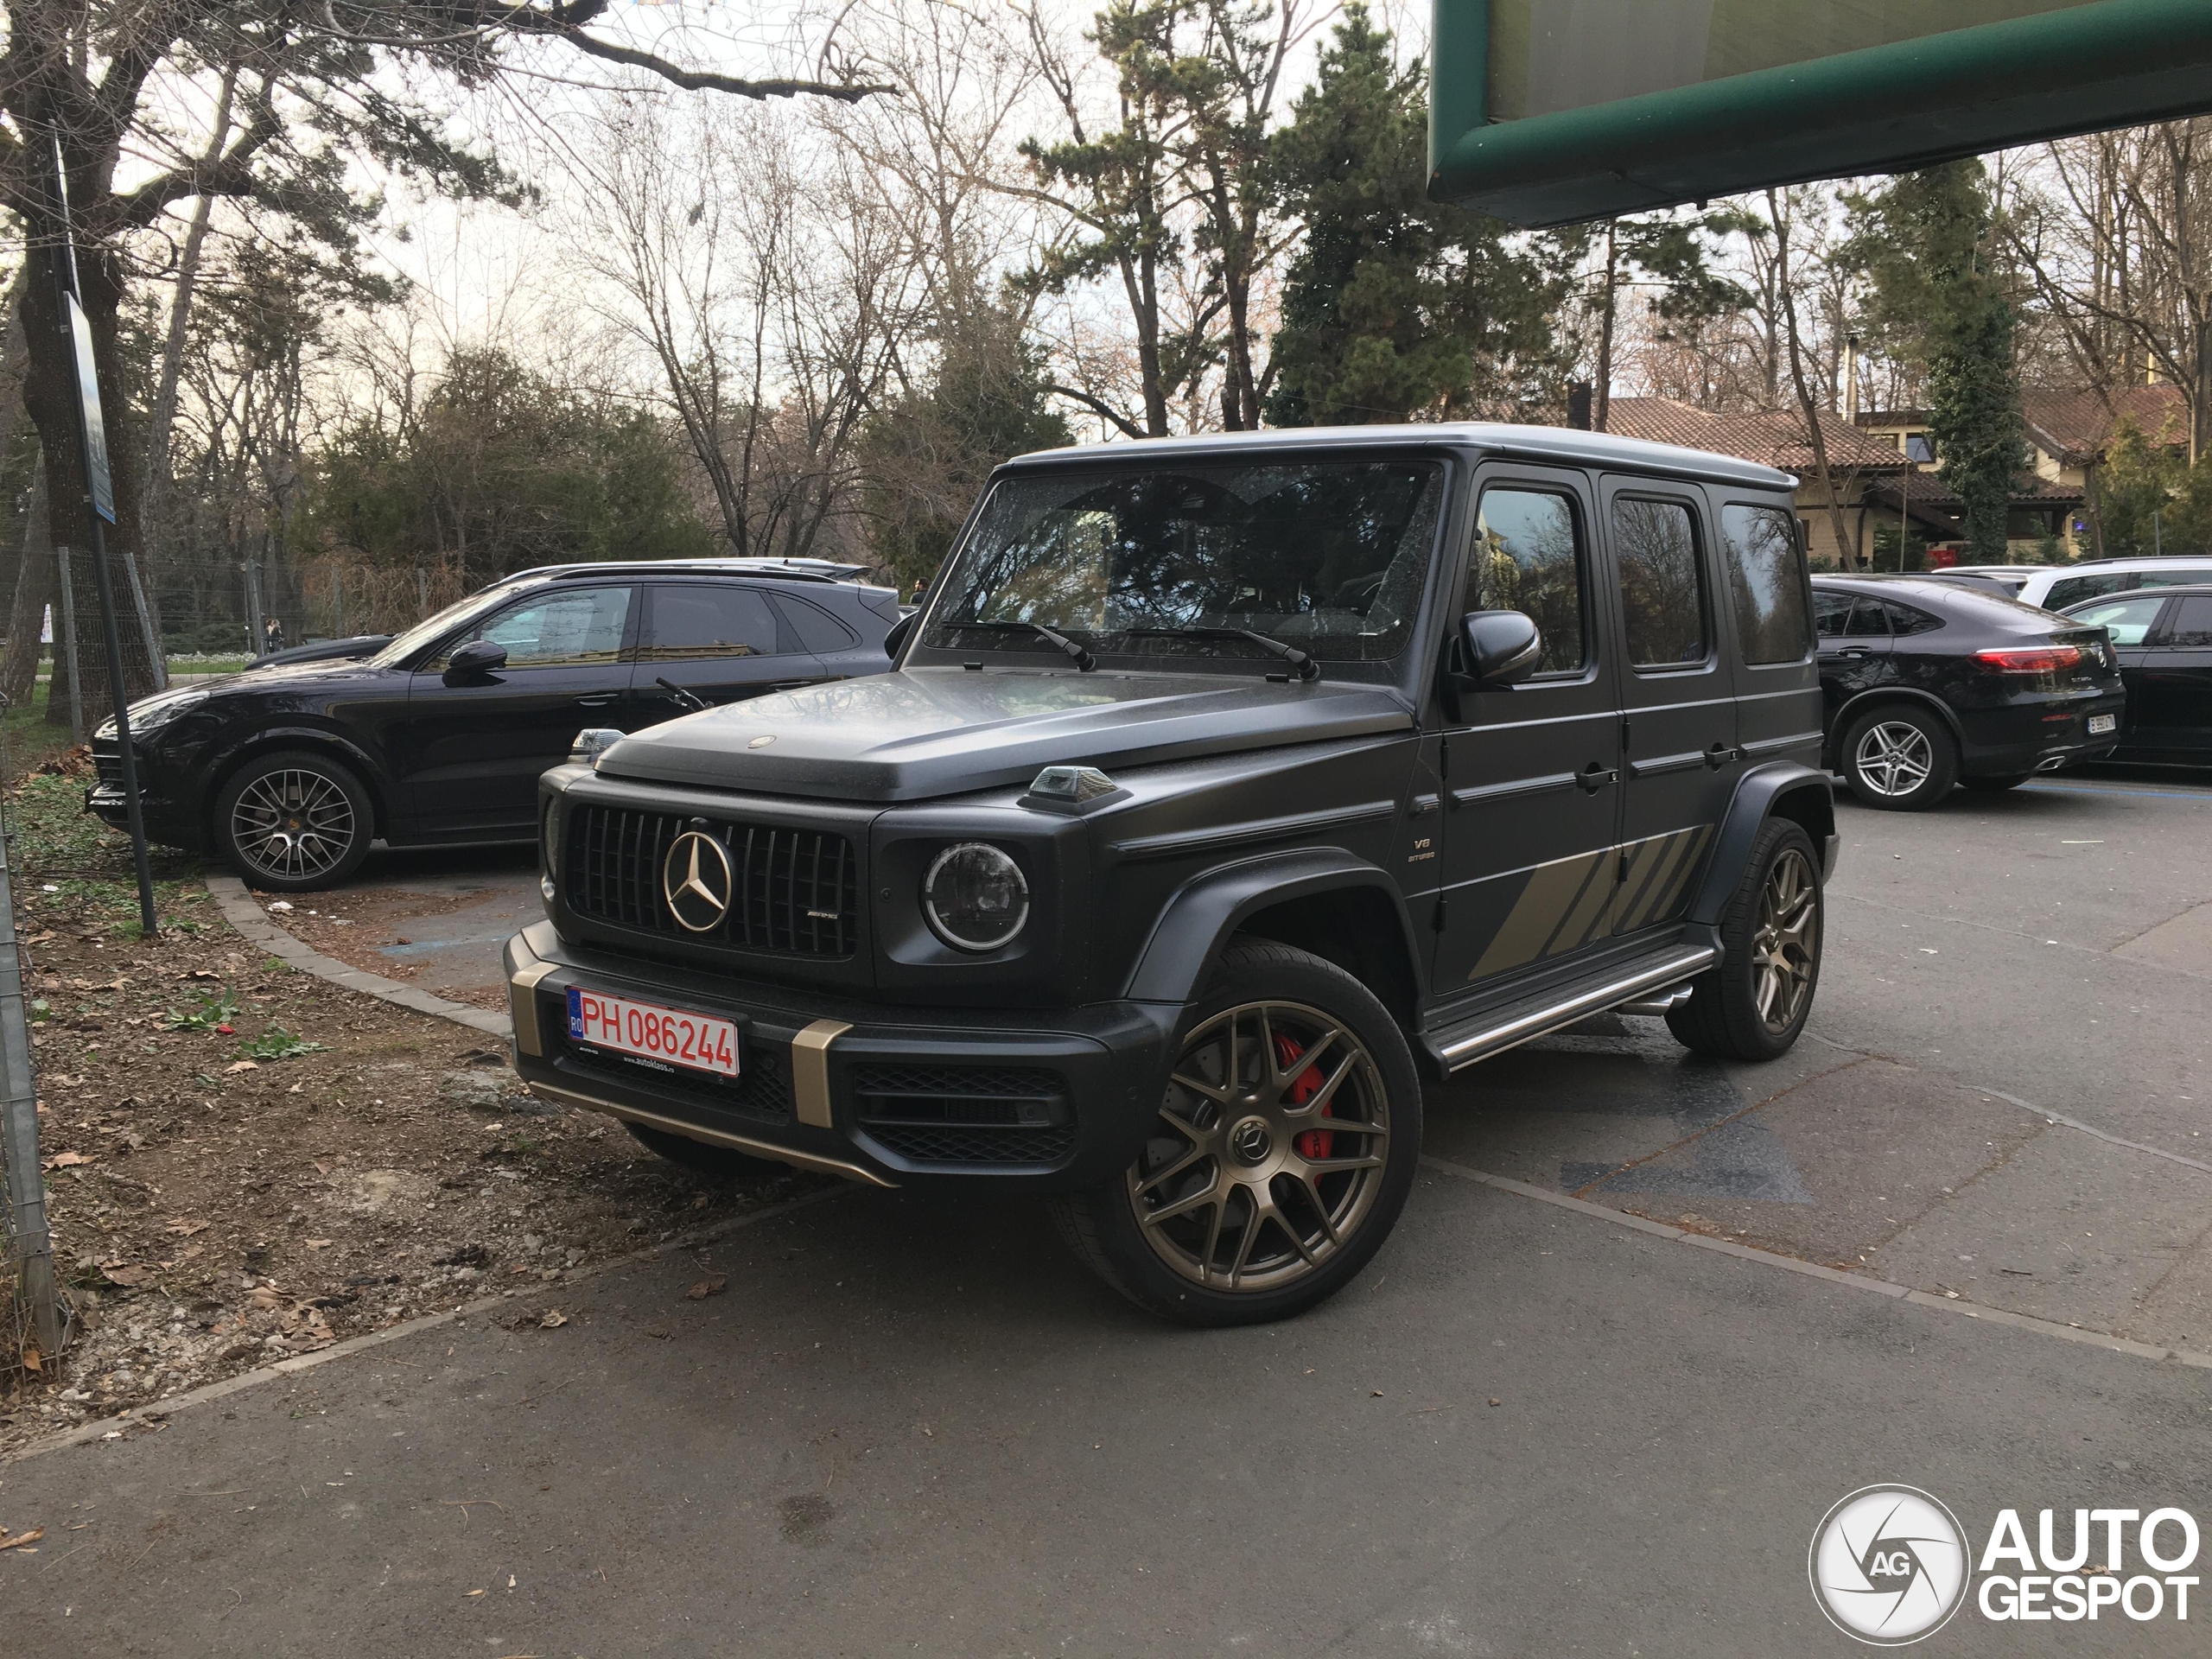 The Mercedes-AMG G 63 “Grand Edition”: Special model in matte